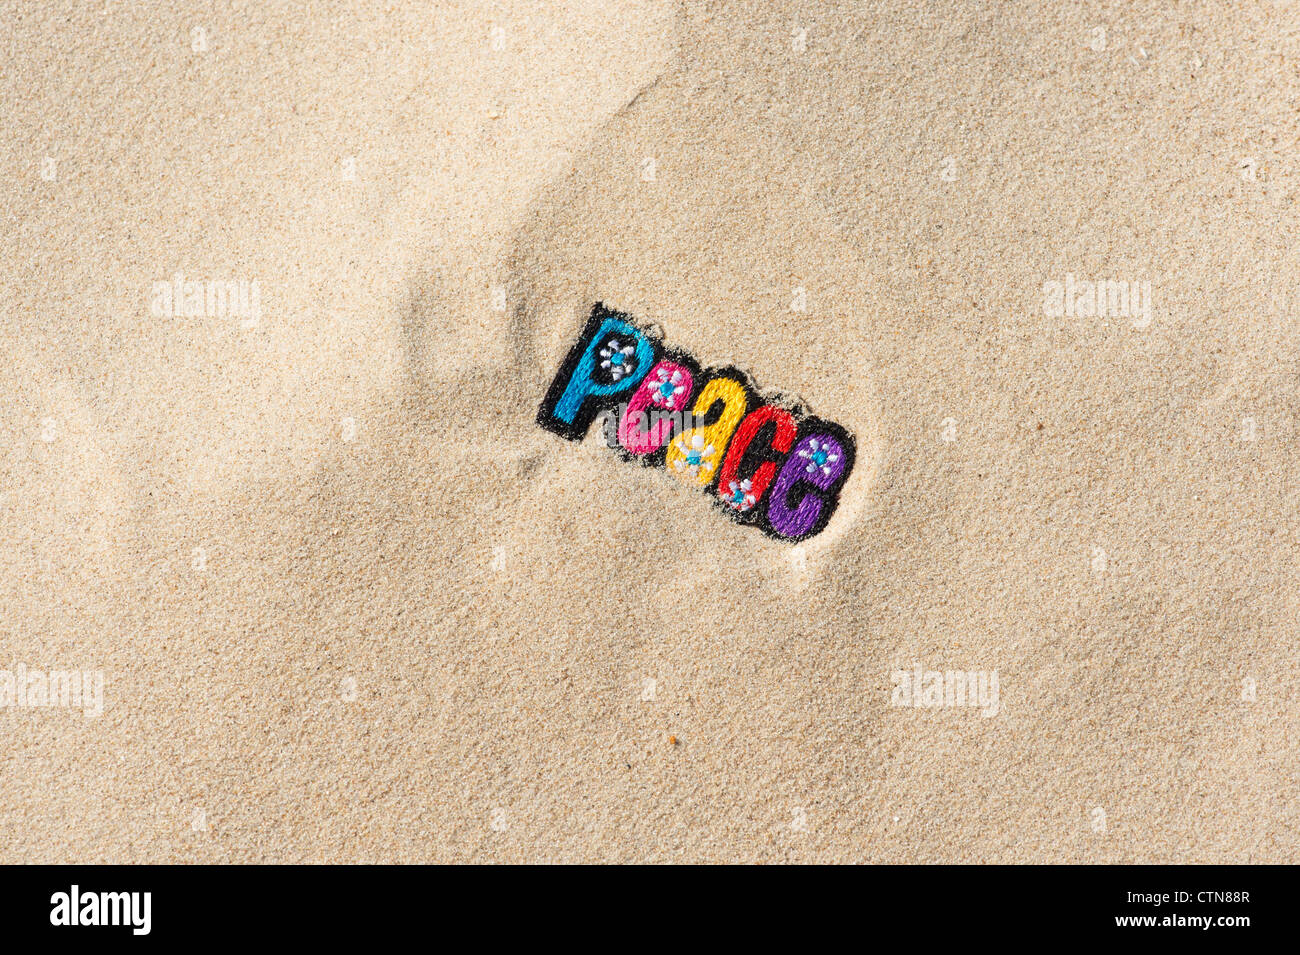 Multicoloured embroidery iron on PEACE patch in sand on a beach Stock Photo